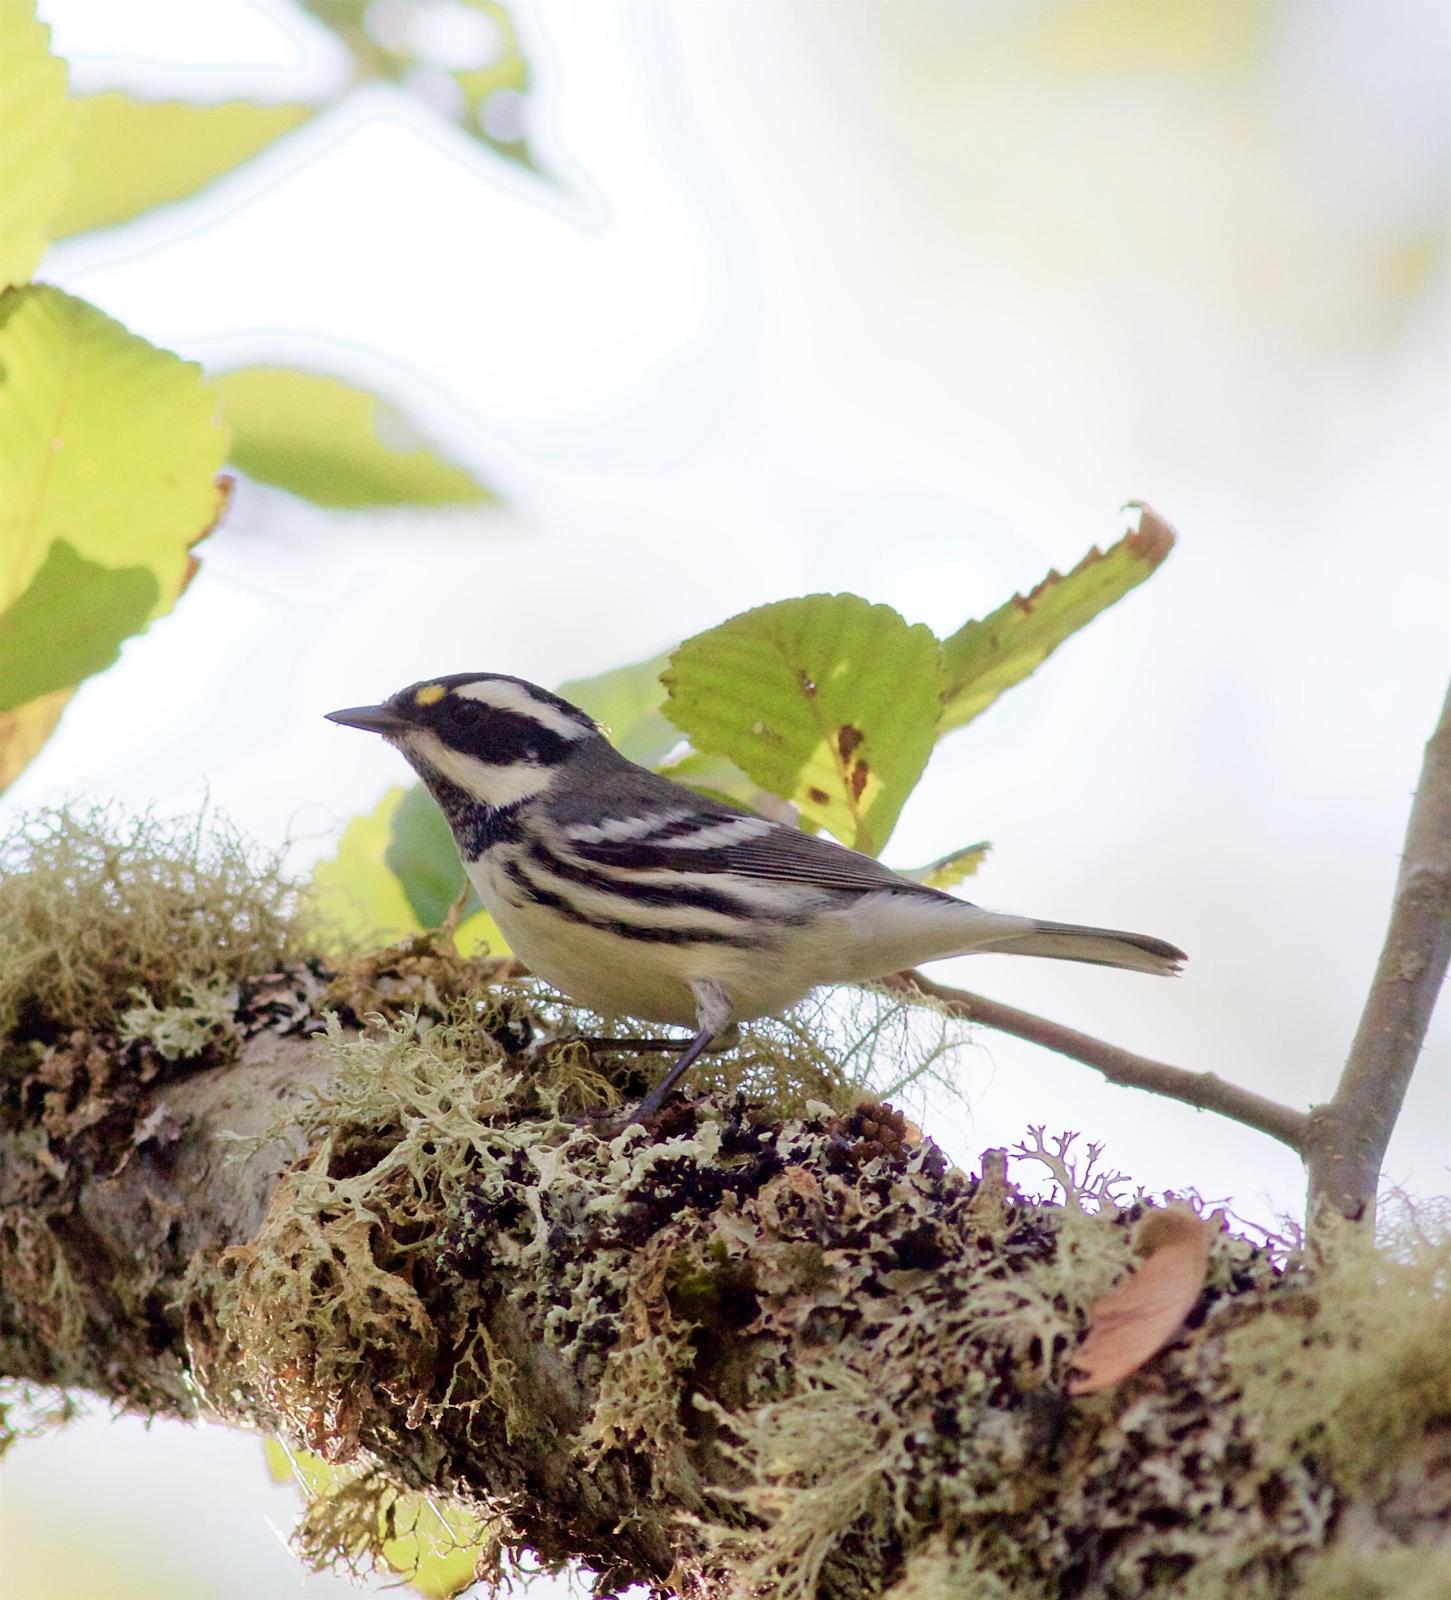 Black-throated Gray Warbler Photo by Kathryn Keith